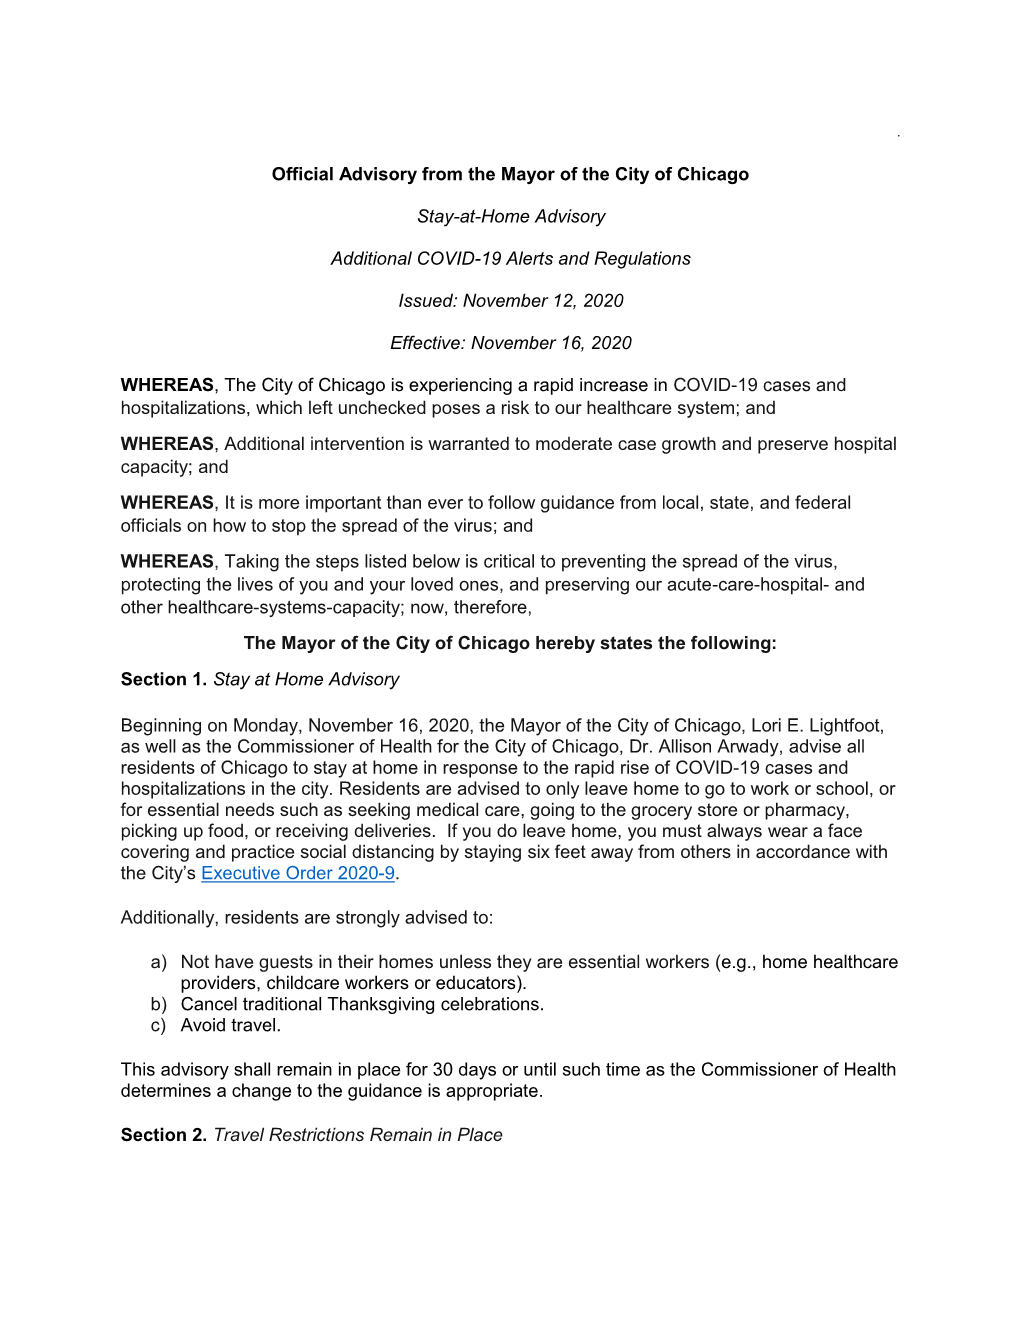 City of Chicago Stay-At-Home Advisory